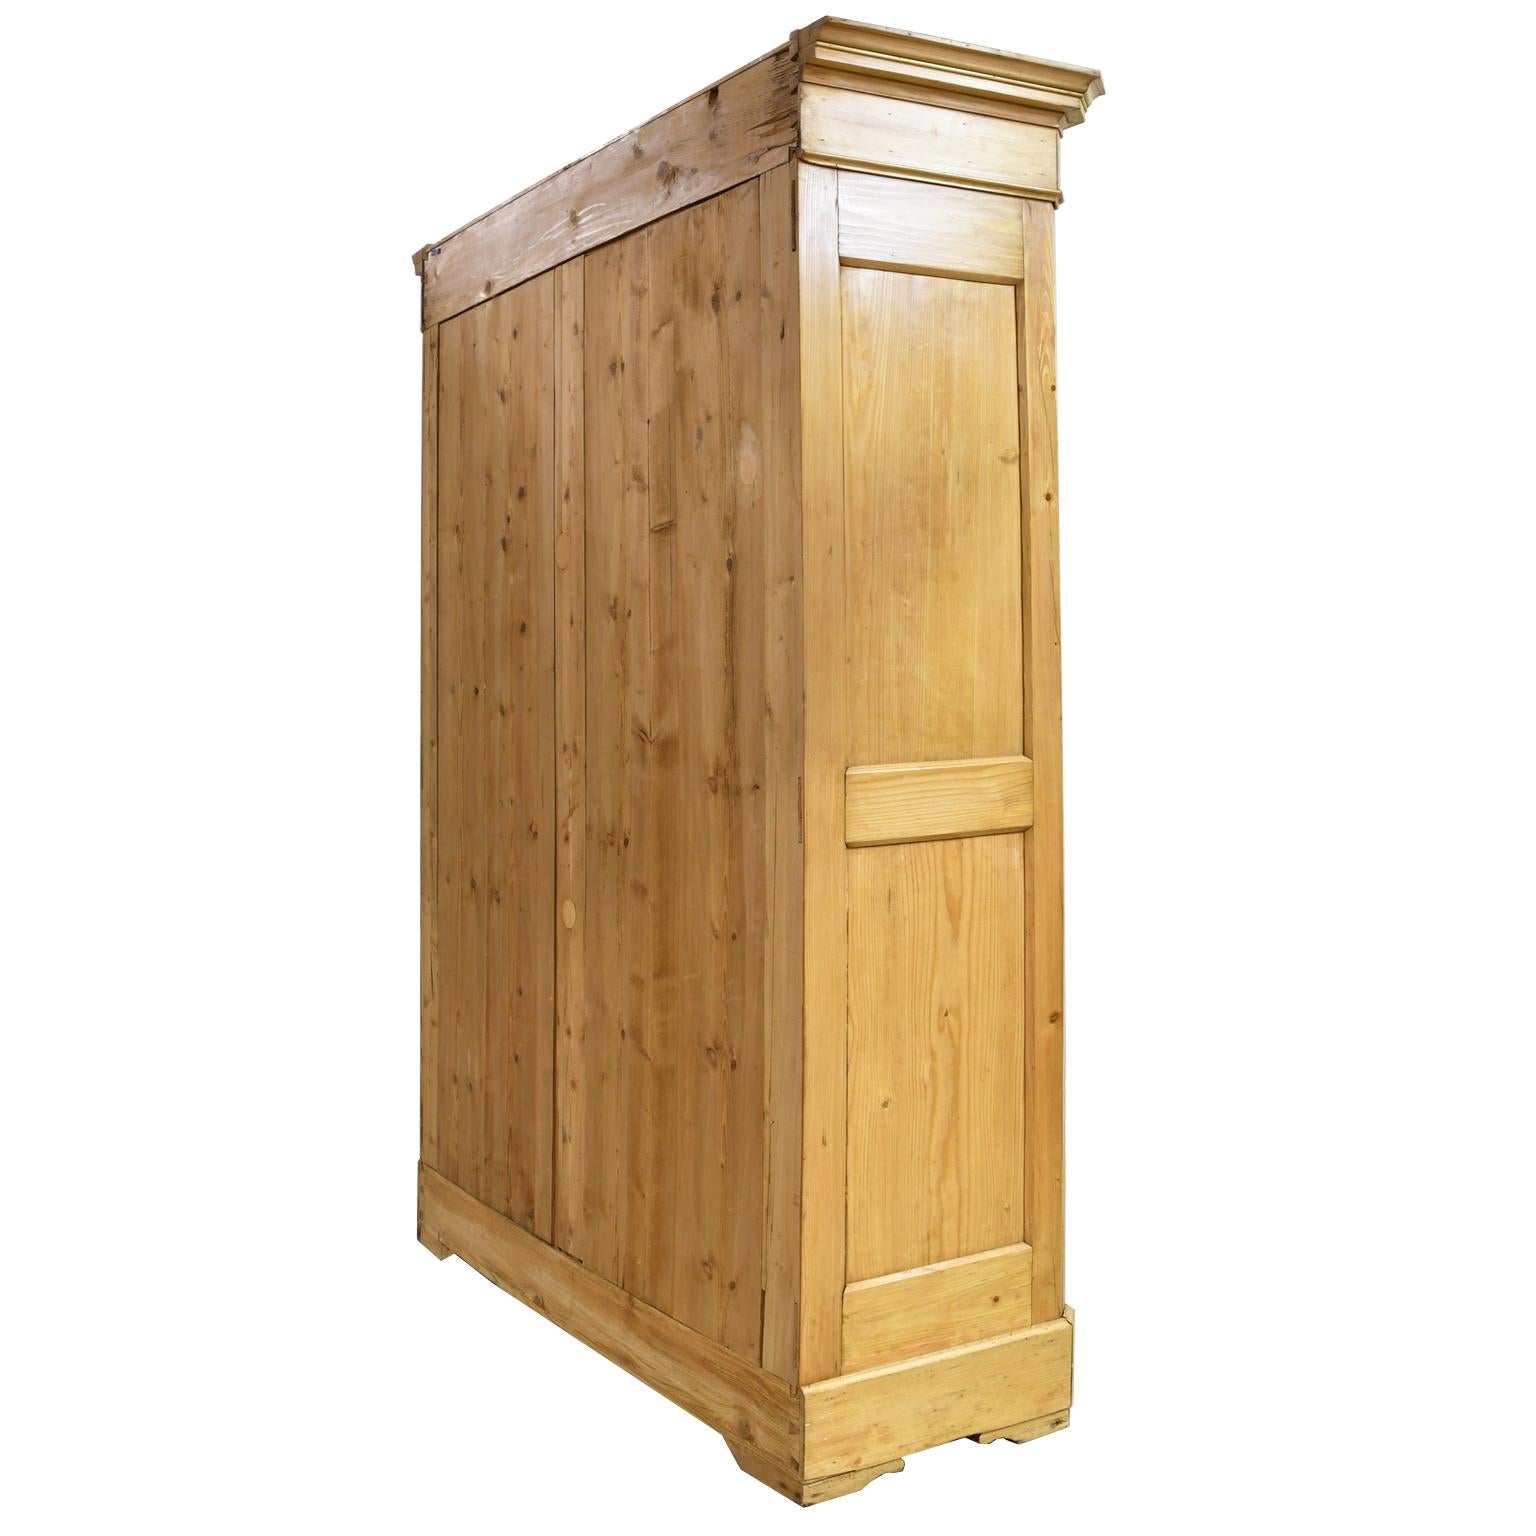 English Wardrobe in Light-Colored Pine with Paneled Doors, c. 1840 3